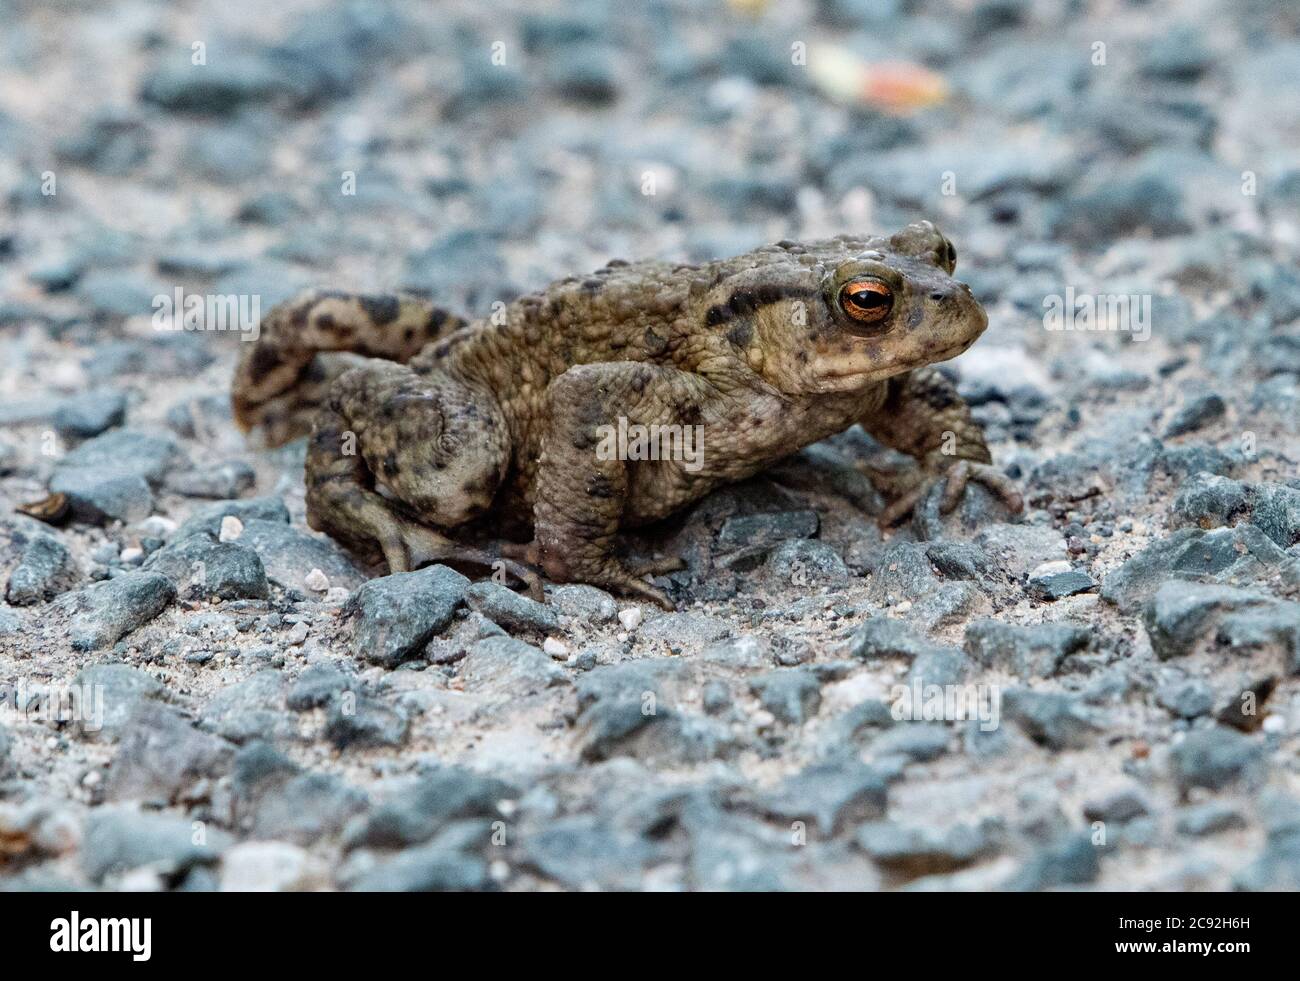 A Toad on a road, Chipping, Preston, Lancashire, UK Stock Photo